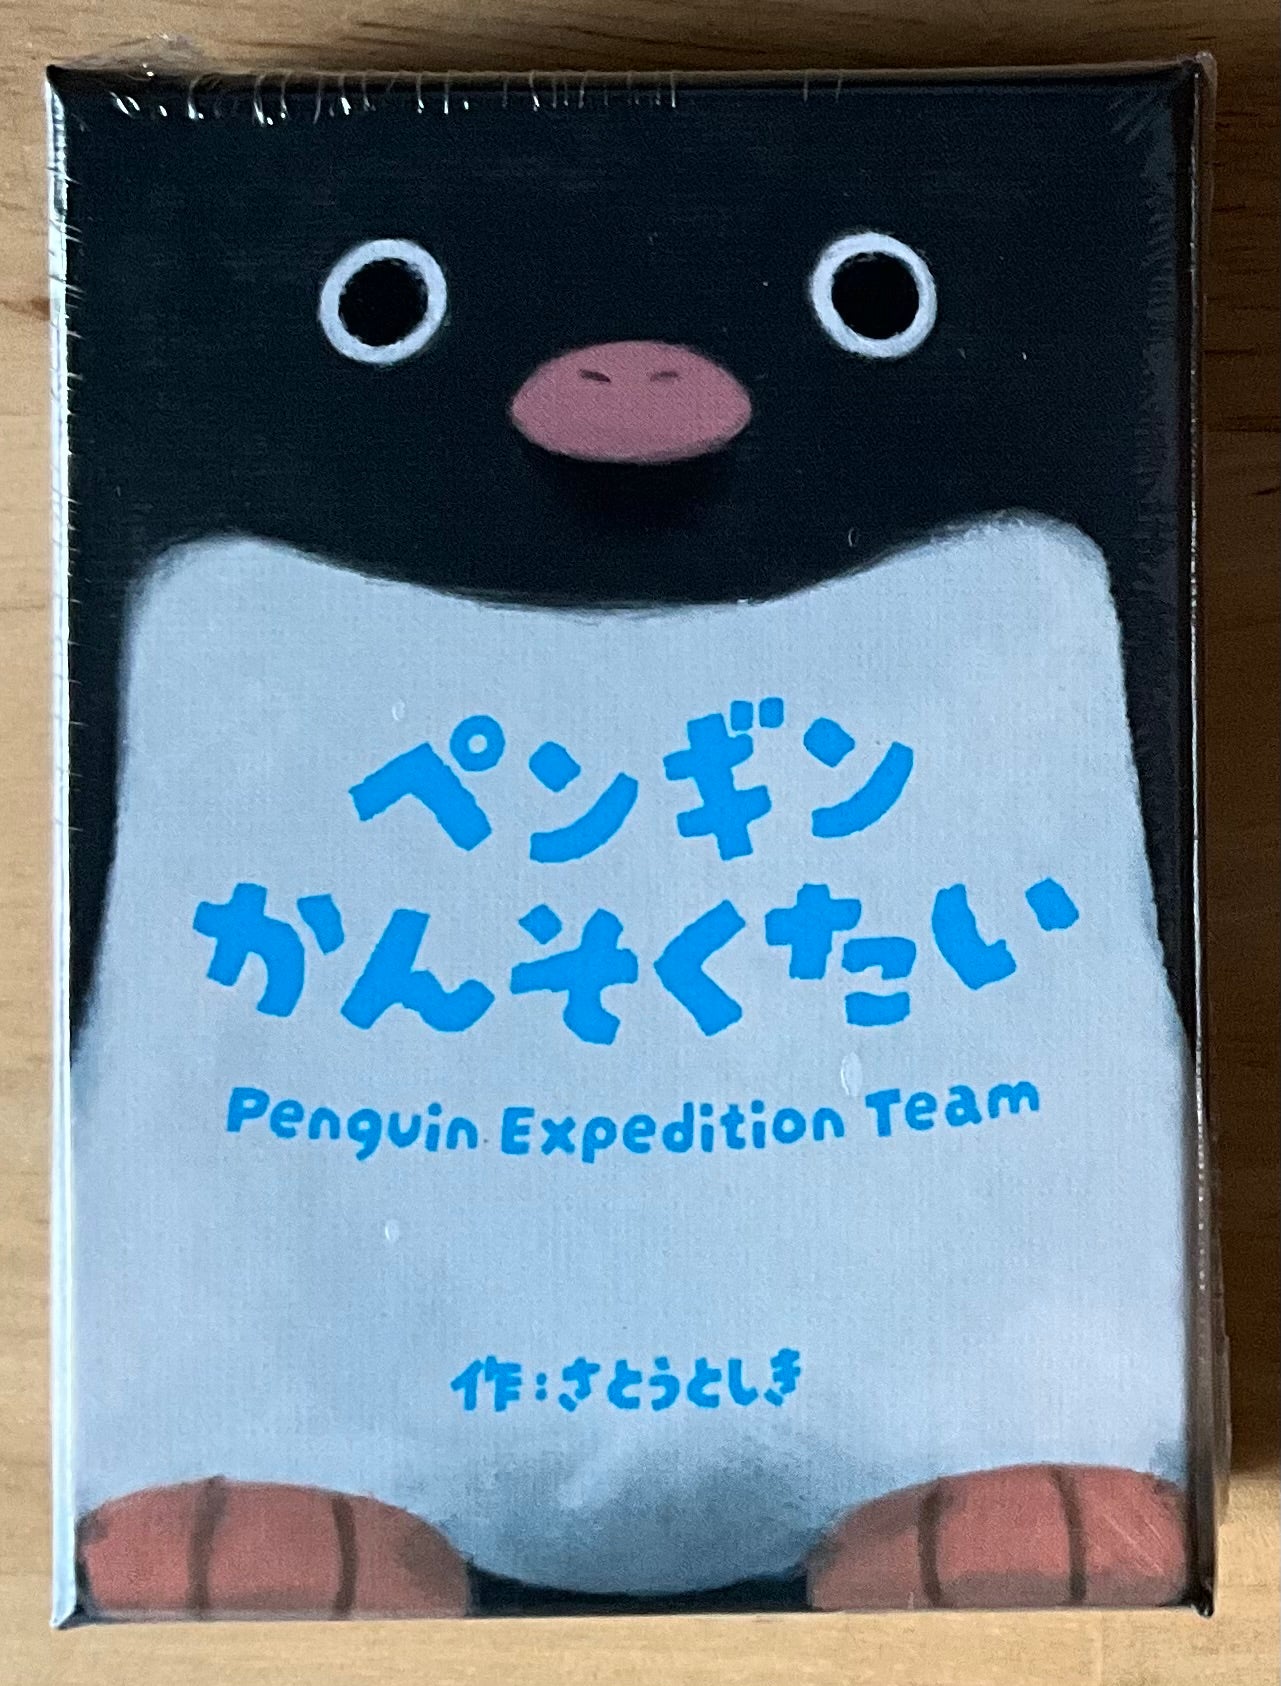 Penguin Expedition Team